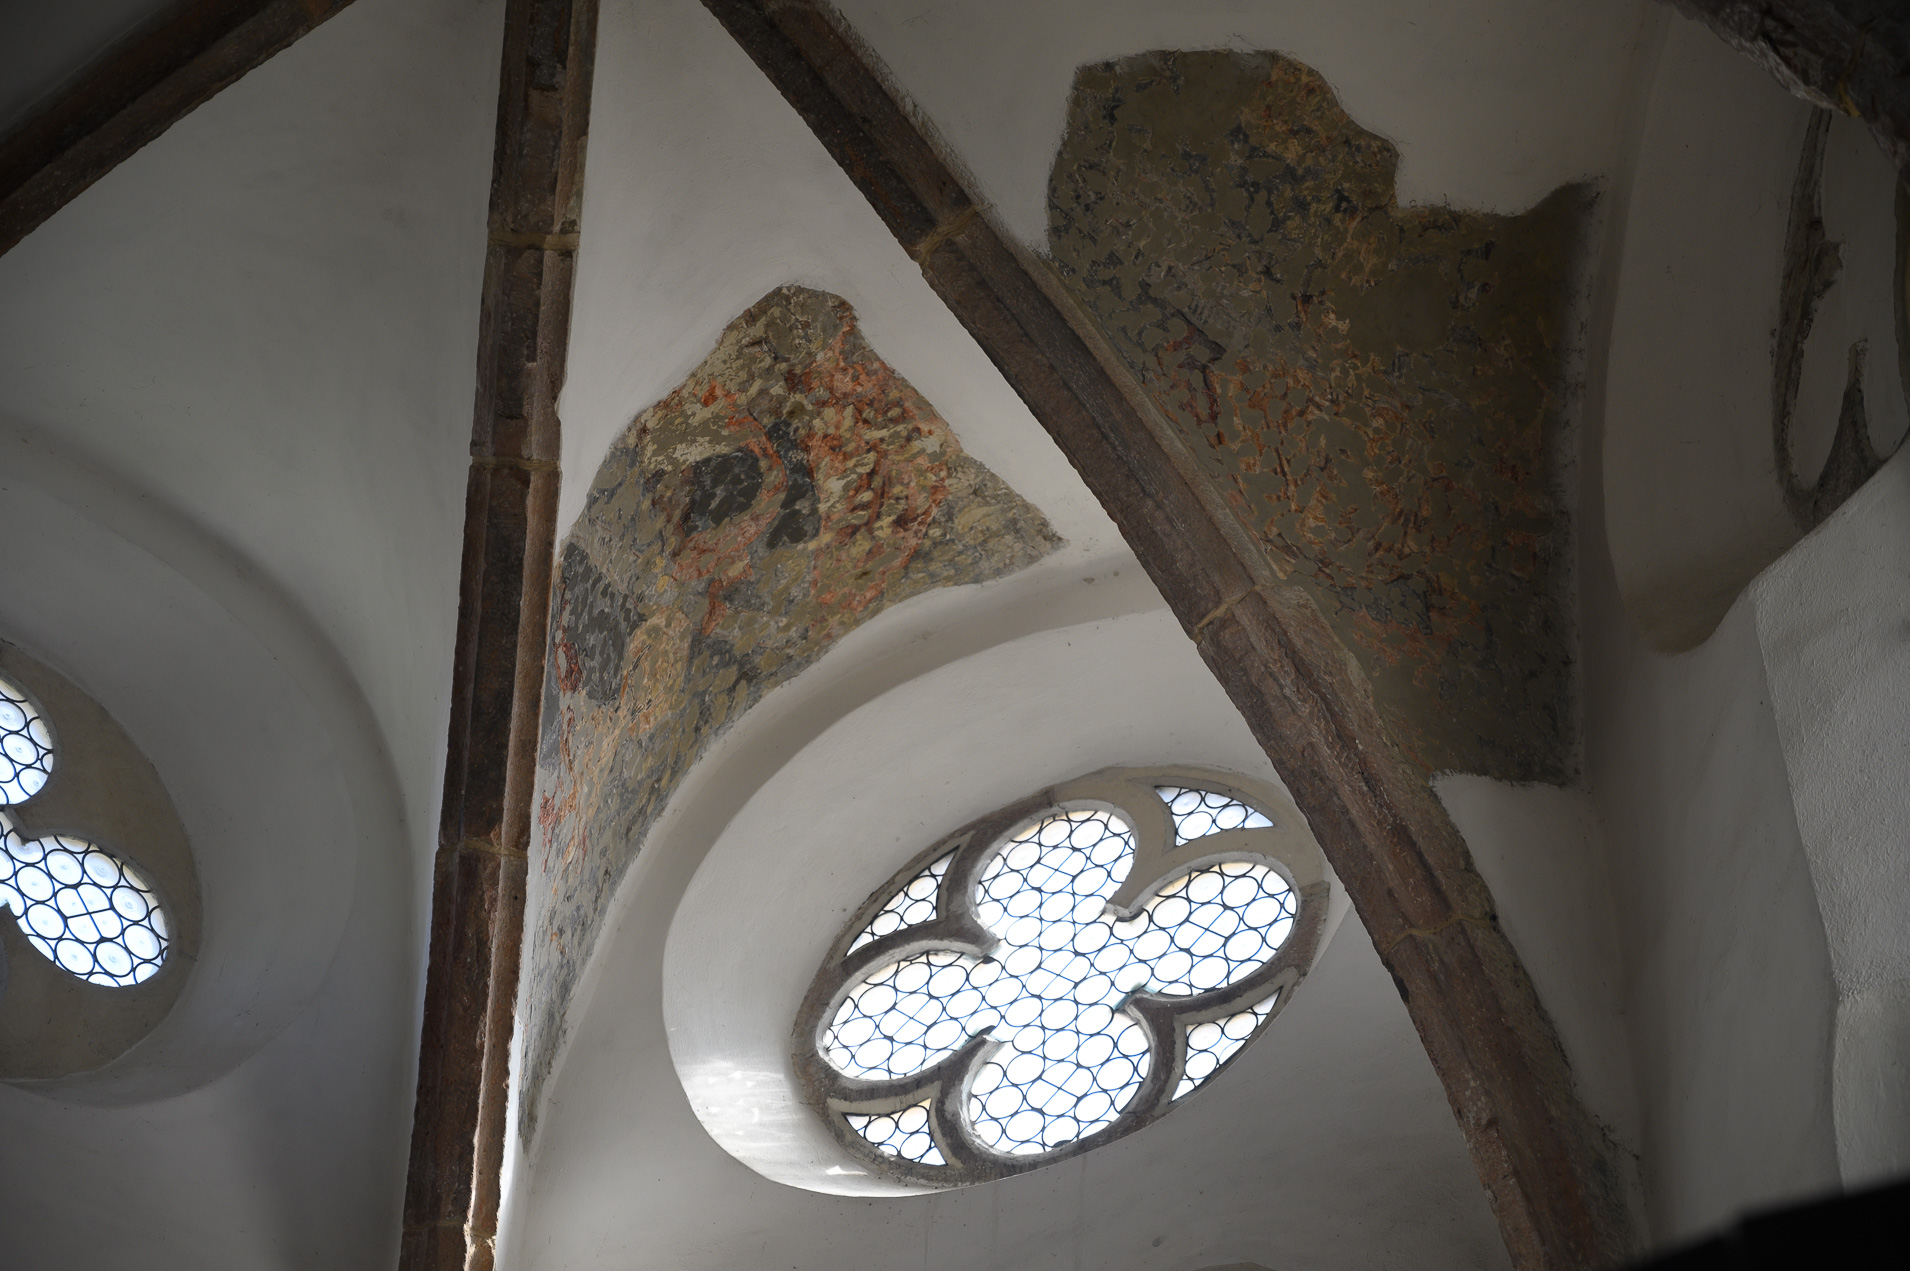 When the Lutherans assumed ownership, they sought to mitigate distraction by covering up older adornments, some of which have recently been uncovered to reveal the architectural history of this edifice.